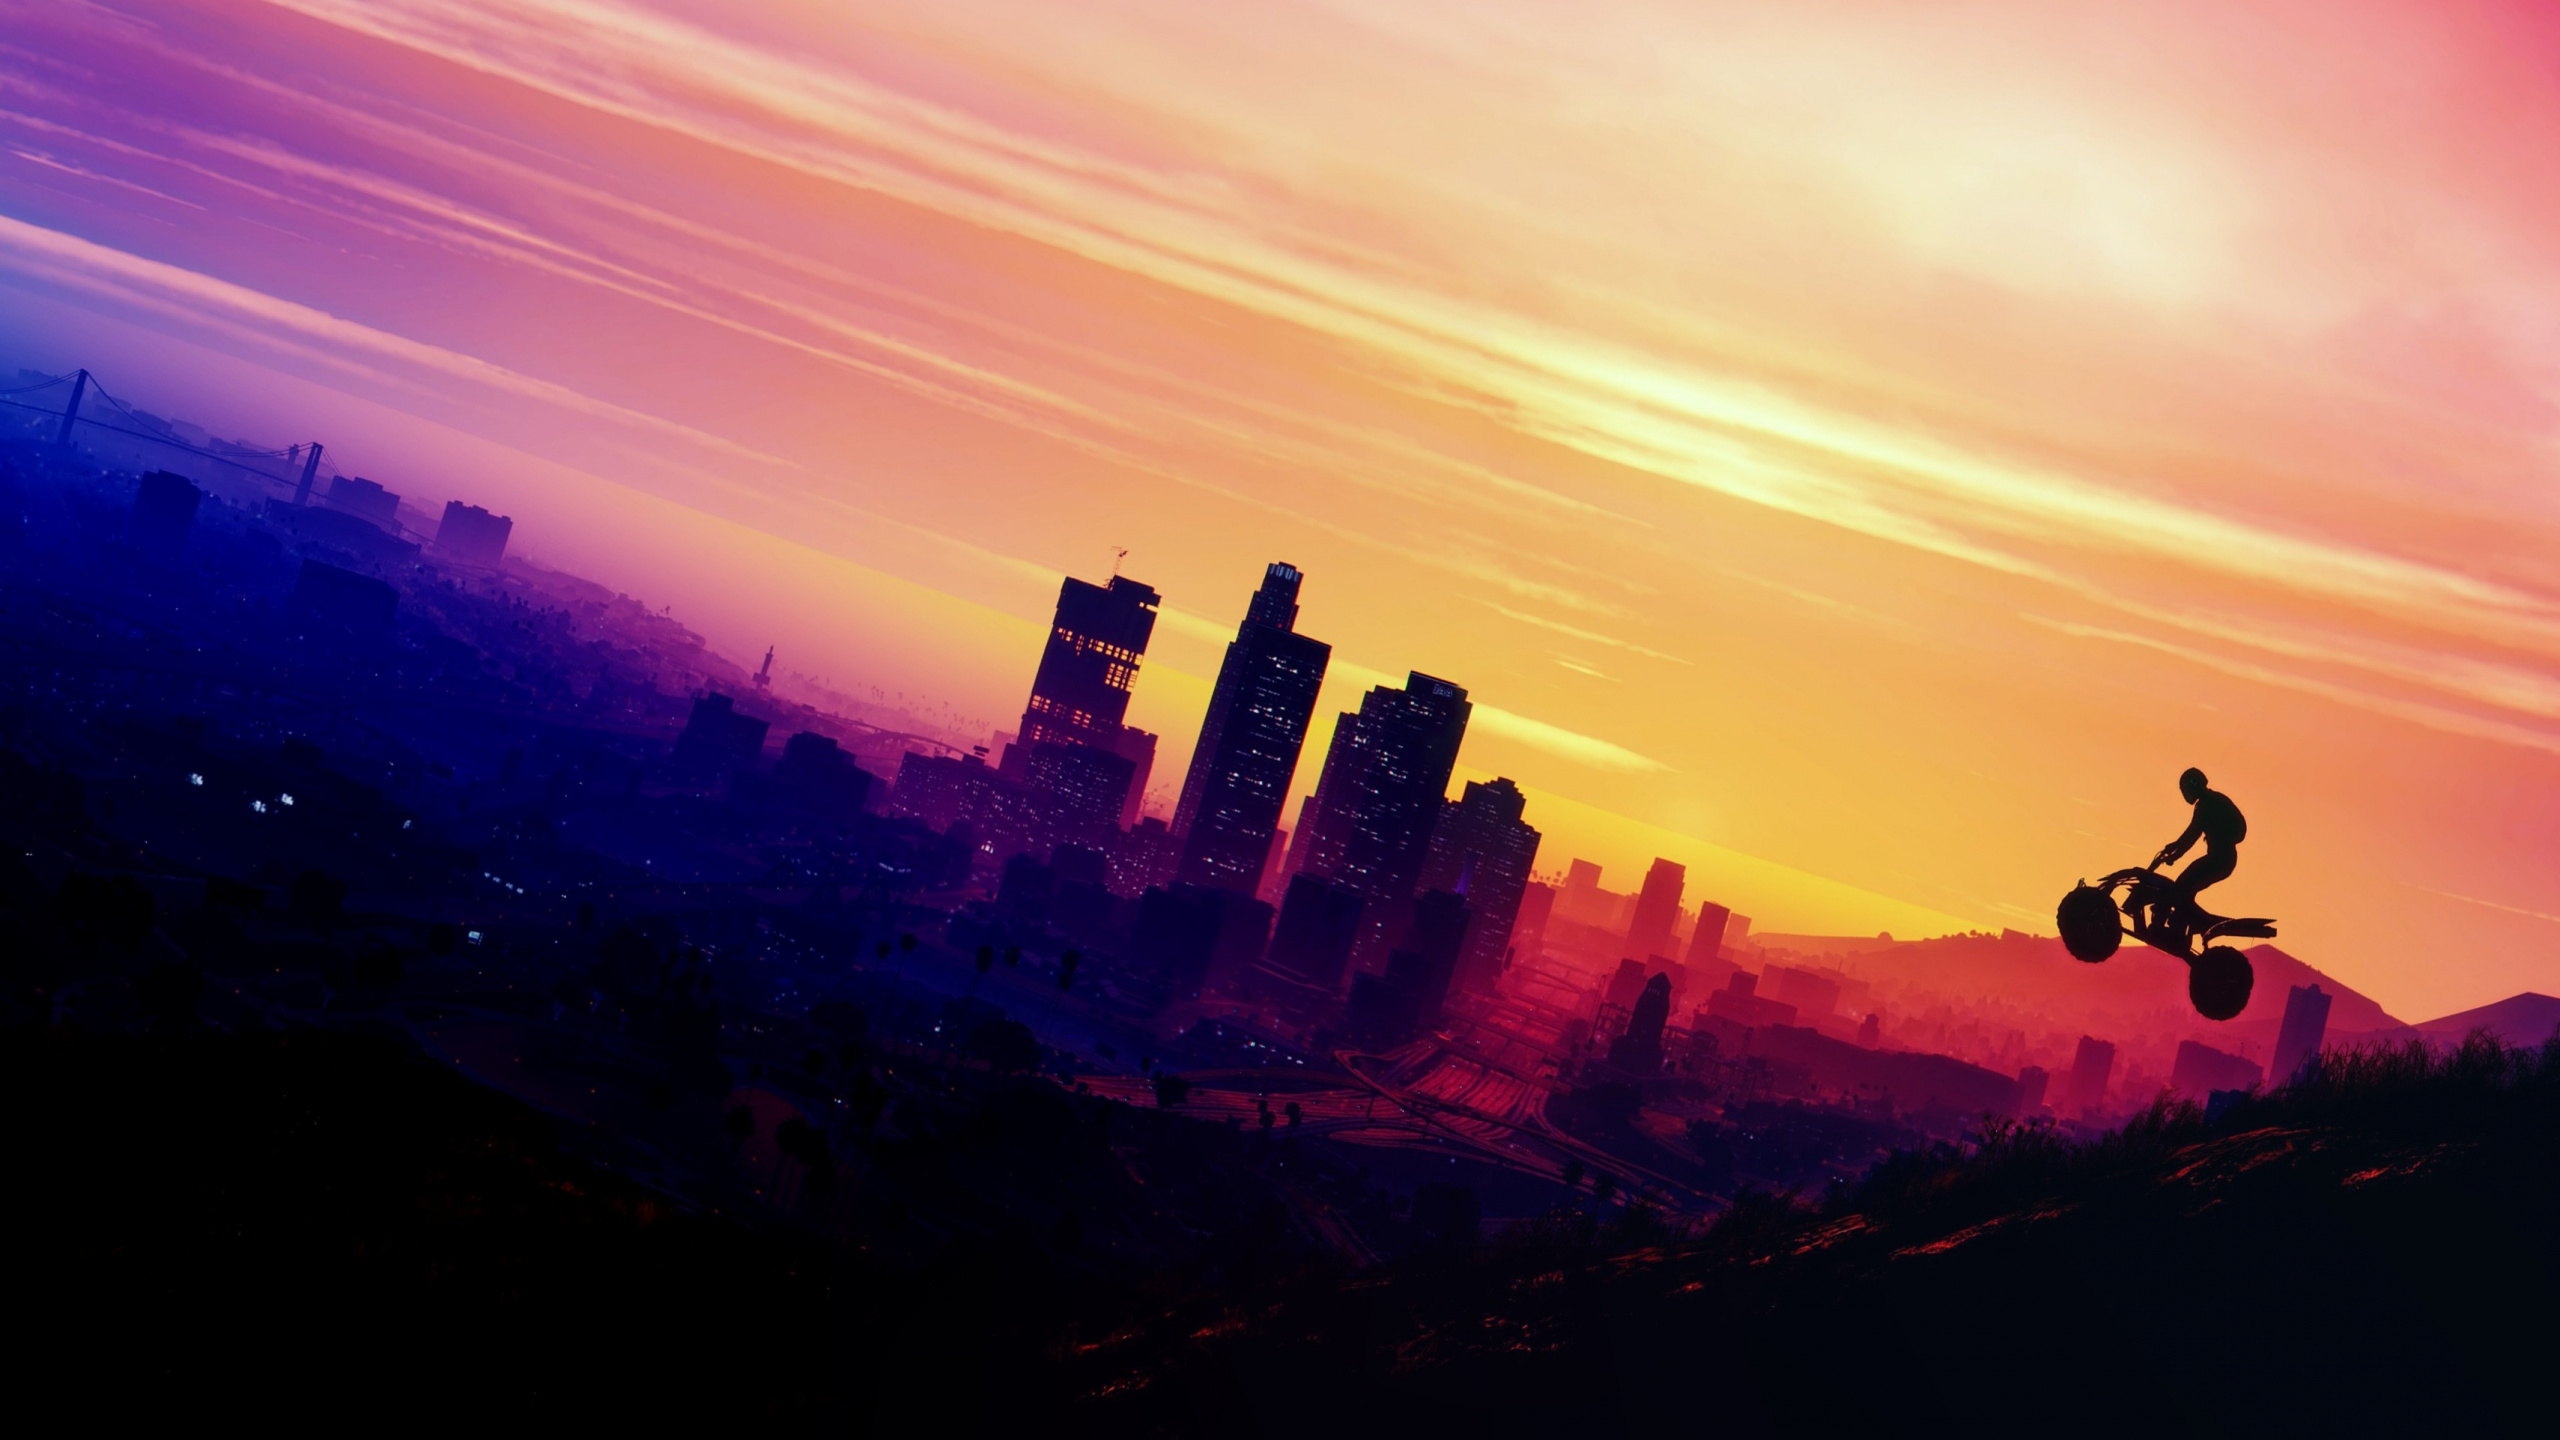 Grand Theft Auto v, Grand Theft Auto San Andreas, Horizon, Afterglow, Sunset. Wallpaper in 2560x1440 Resolution